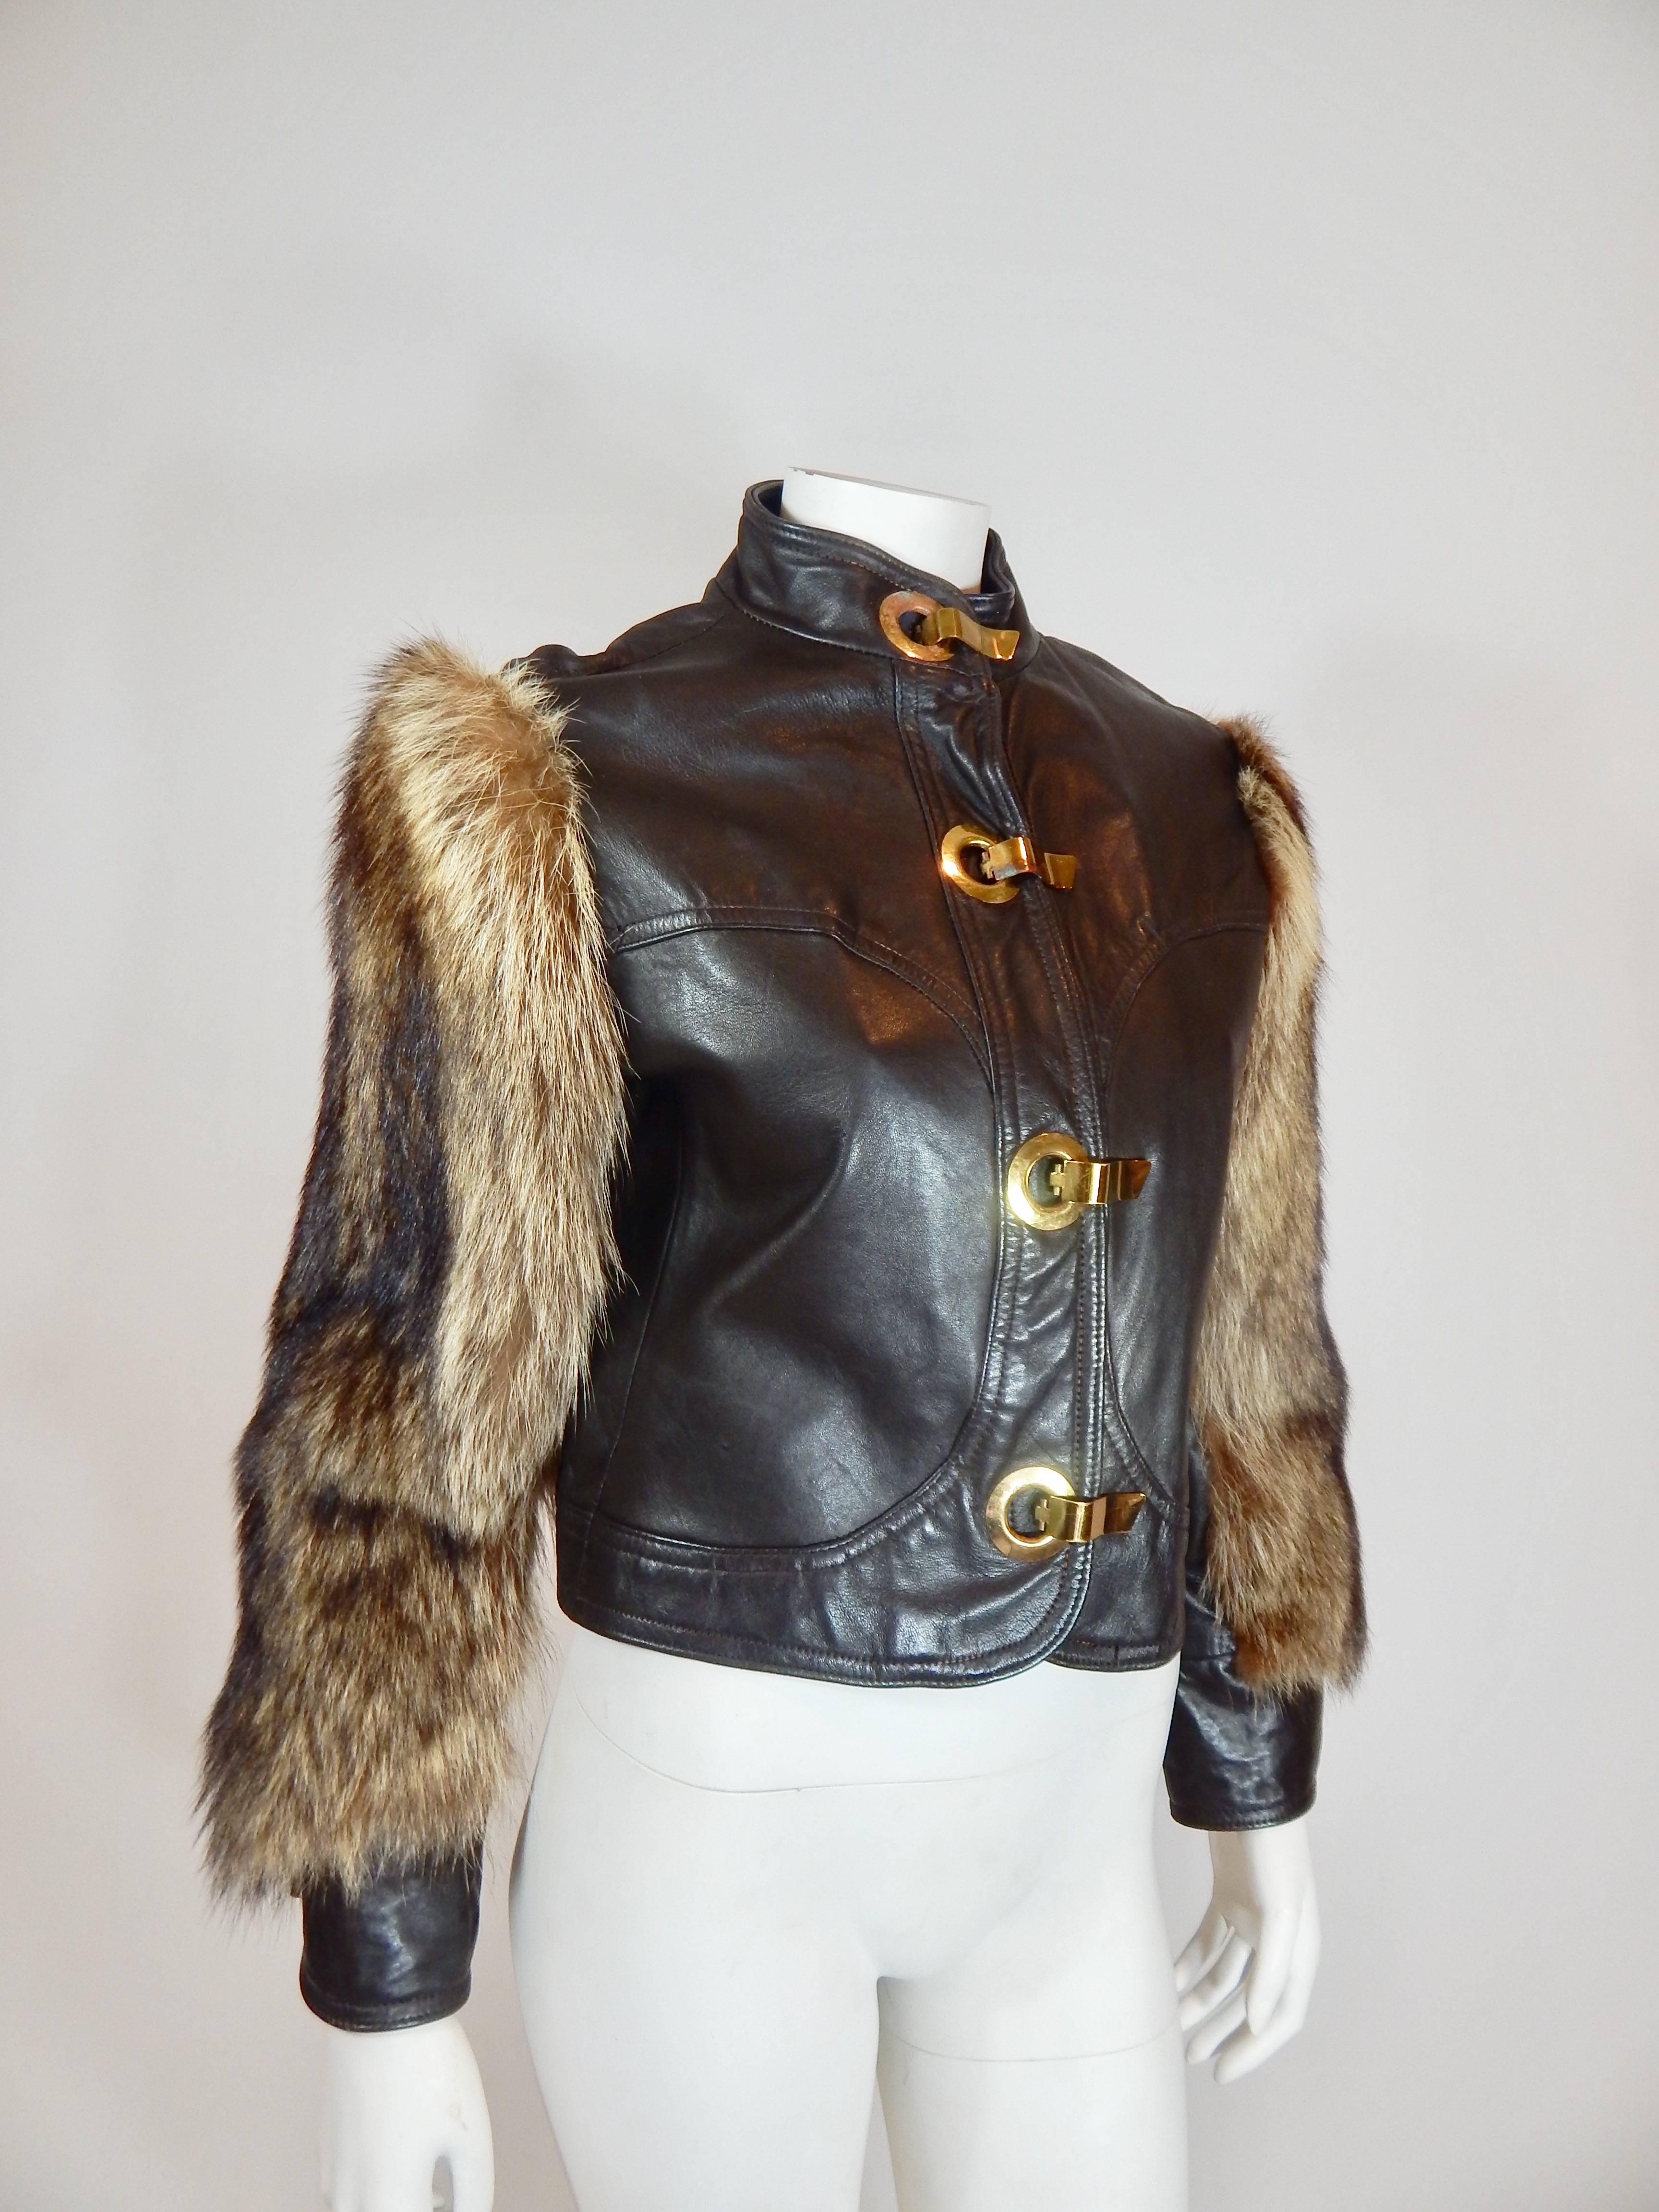 1970s Chocolate Brown Leather. Raccoon Fur Sleeves. Brass buckle clasps in front and cuff. Leather and Fur are both  in Excellent Condition. The brass clasps exhibit some age with some tarnish. See photo. Interior is Dark brown and exhibits some